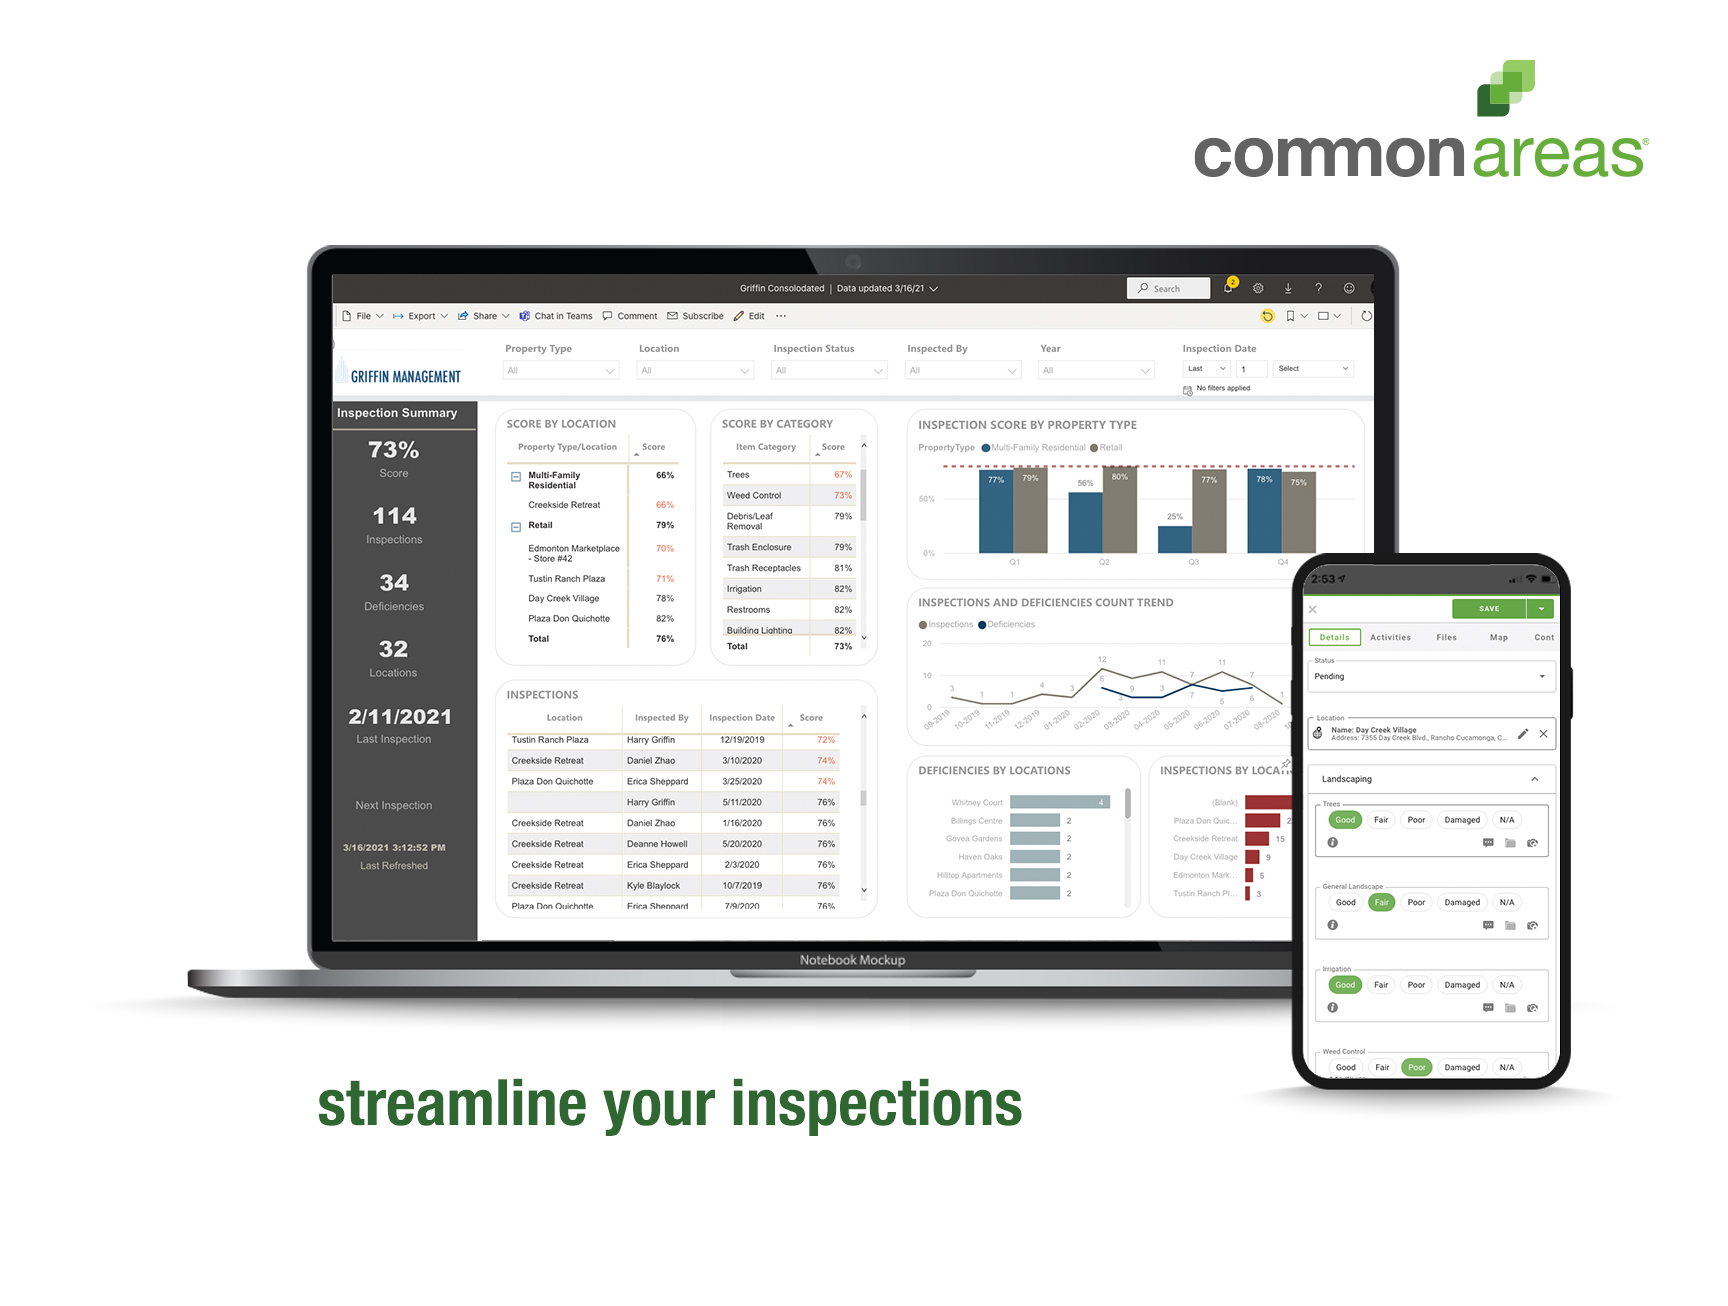 Staying on top of inspections and following a consistent process each time is key to keeping things running smoothly. Easily access the documentation needed to collect an accurate assessment of the condition of your properties and assets.